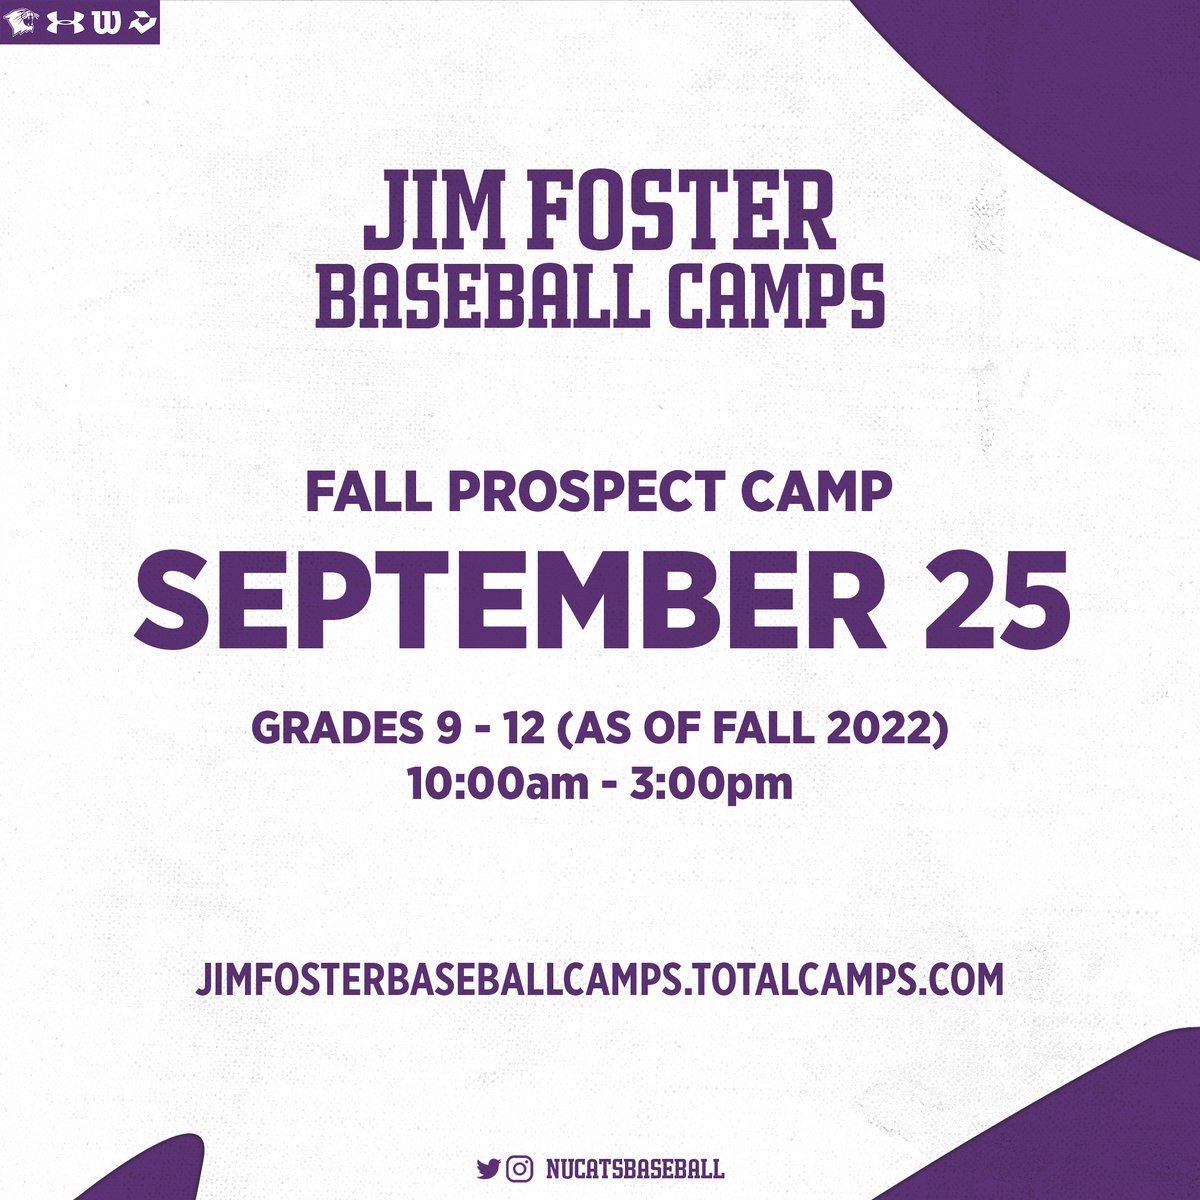 We are 10 days away from our Jim Foster Fall Prospect Camp! To register, visit: jimfosterbaseballcamps.totalcamps.com #GoCats | @JimFoster23